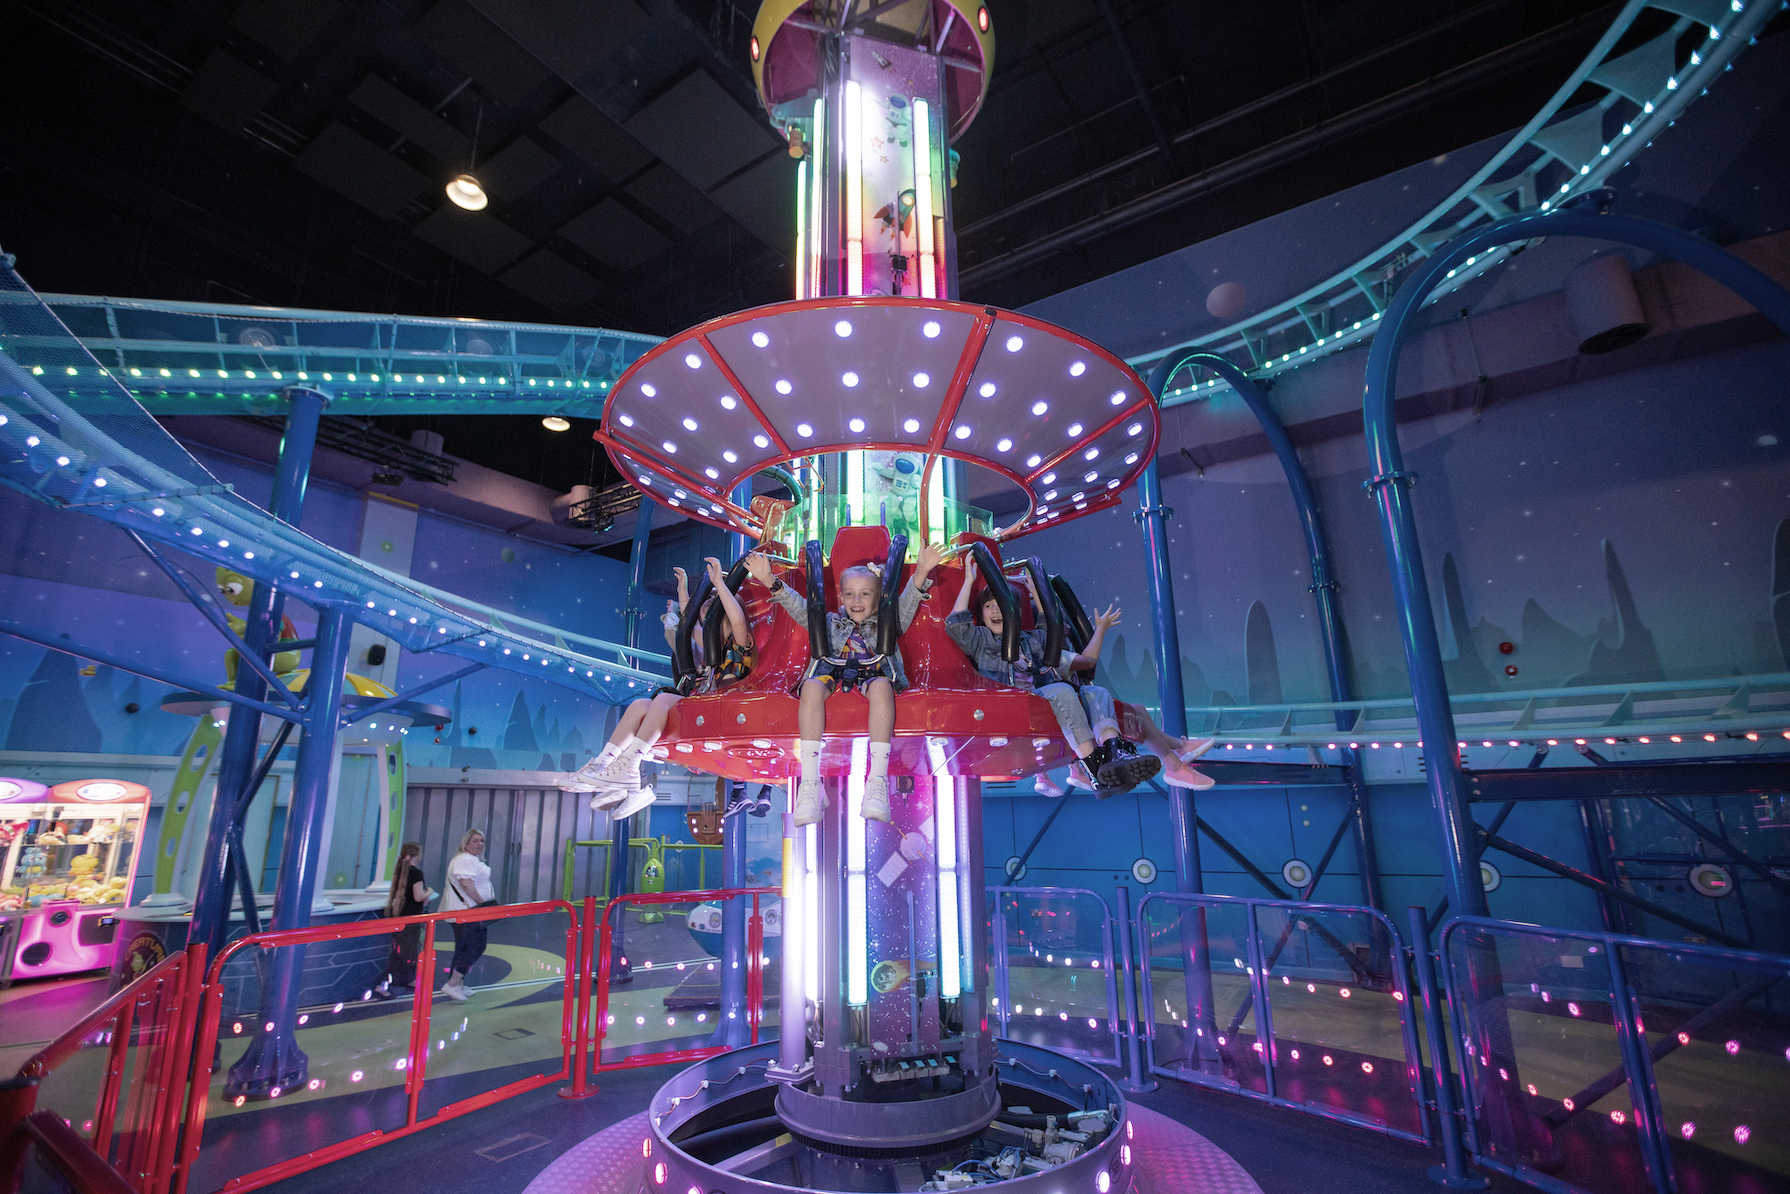 Family Experience Of The Month: Babylon Park Indoor Theme Park